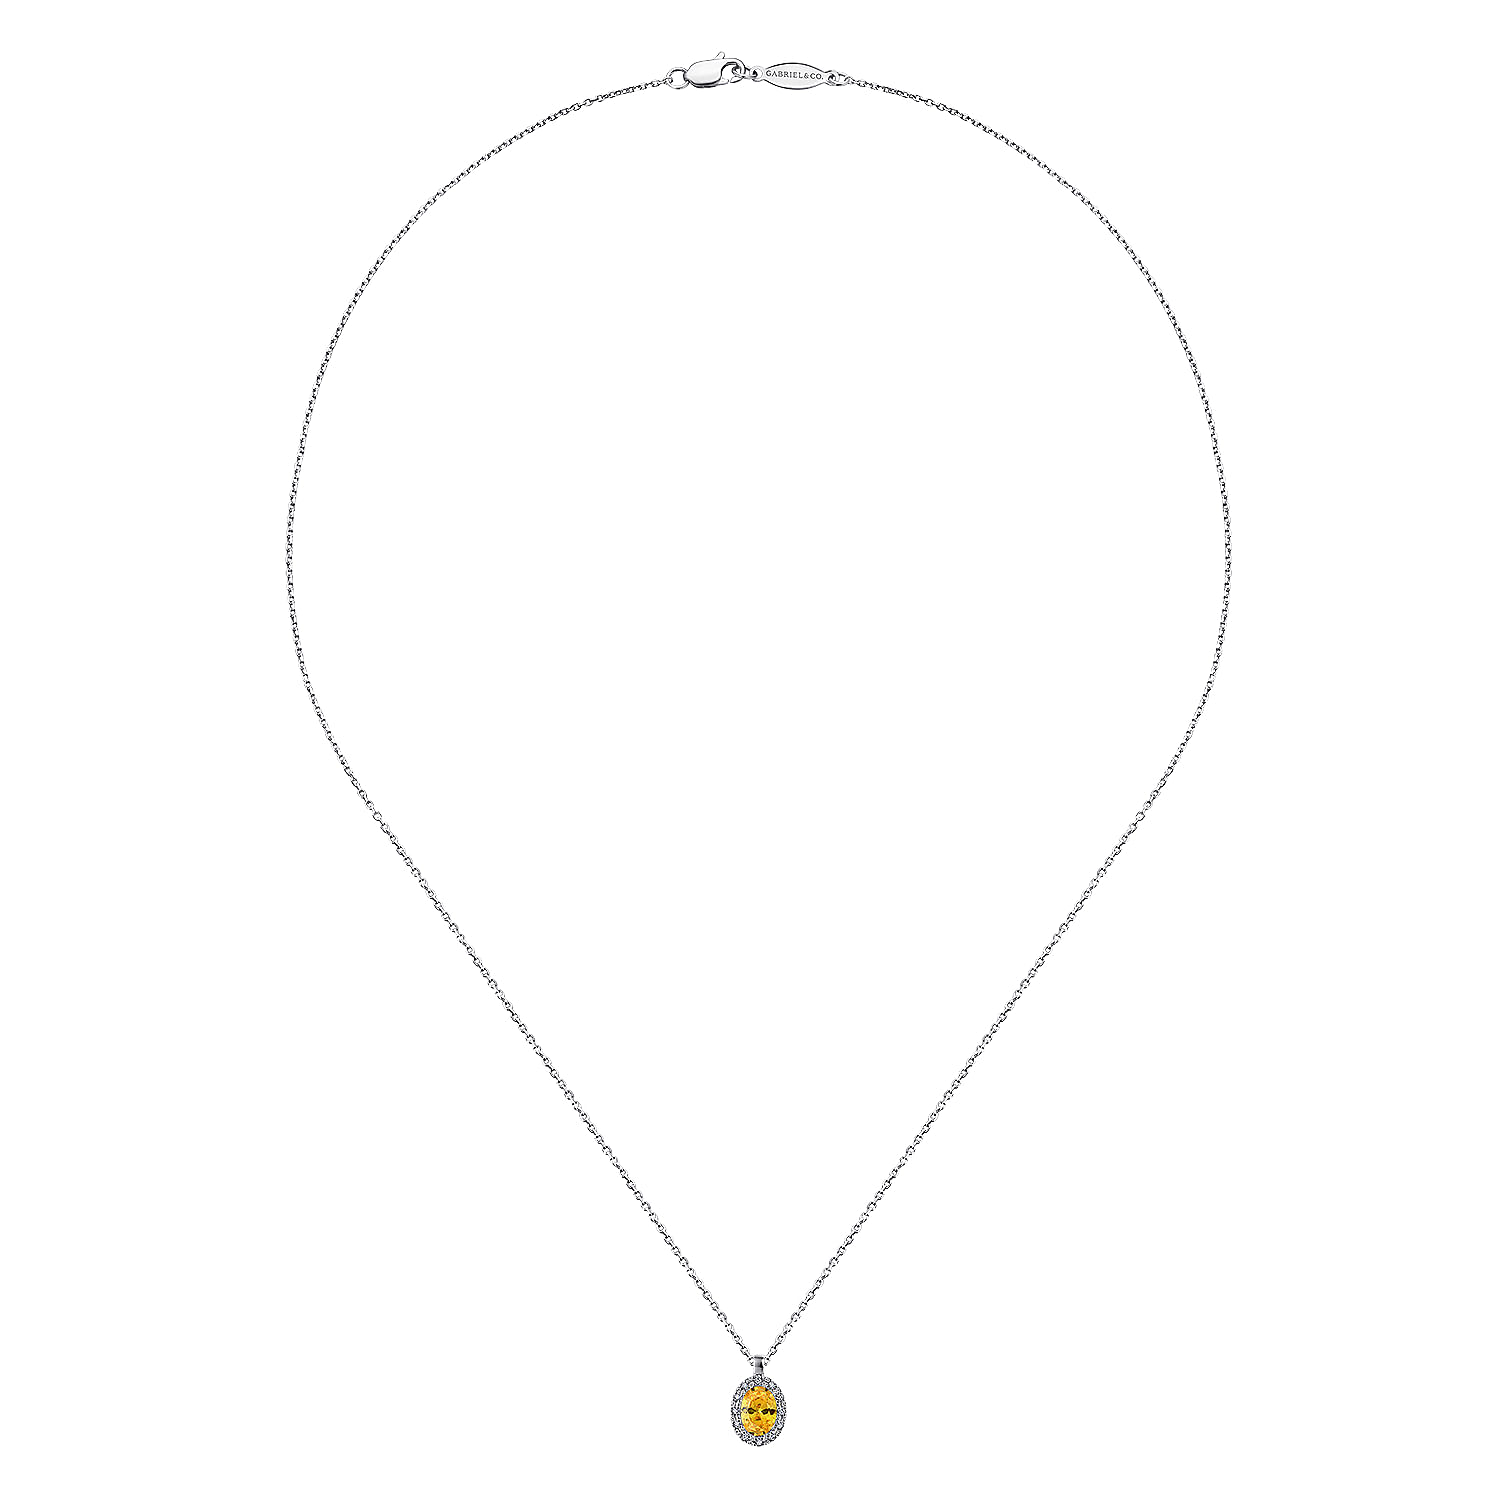 18 inch 14K White Gold Citrine and Diamond Halo Drop Necklace